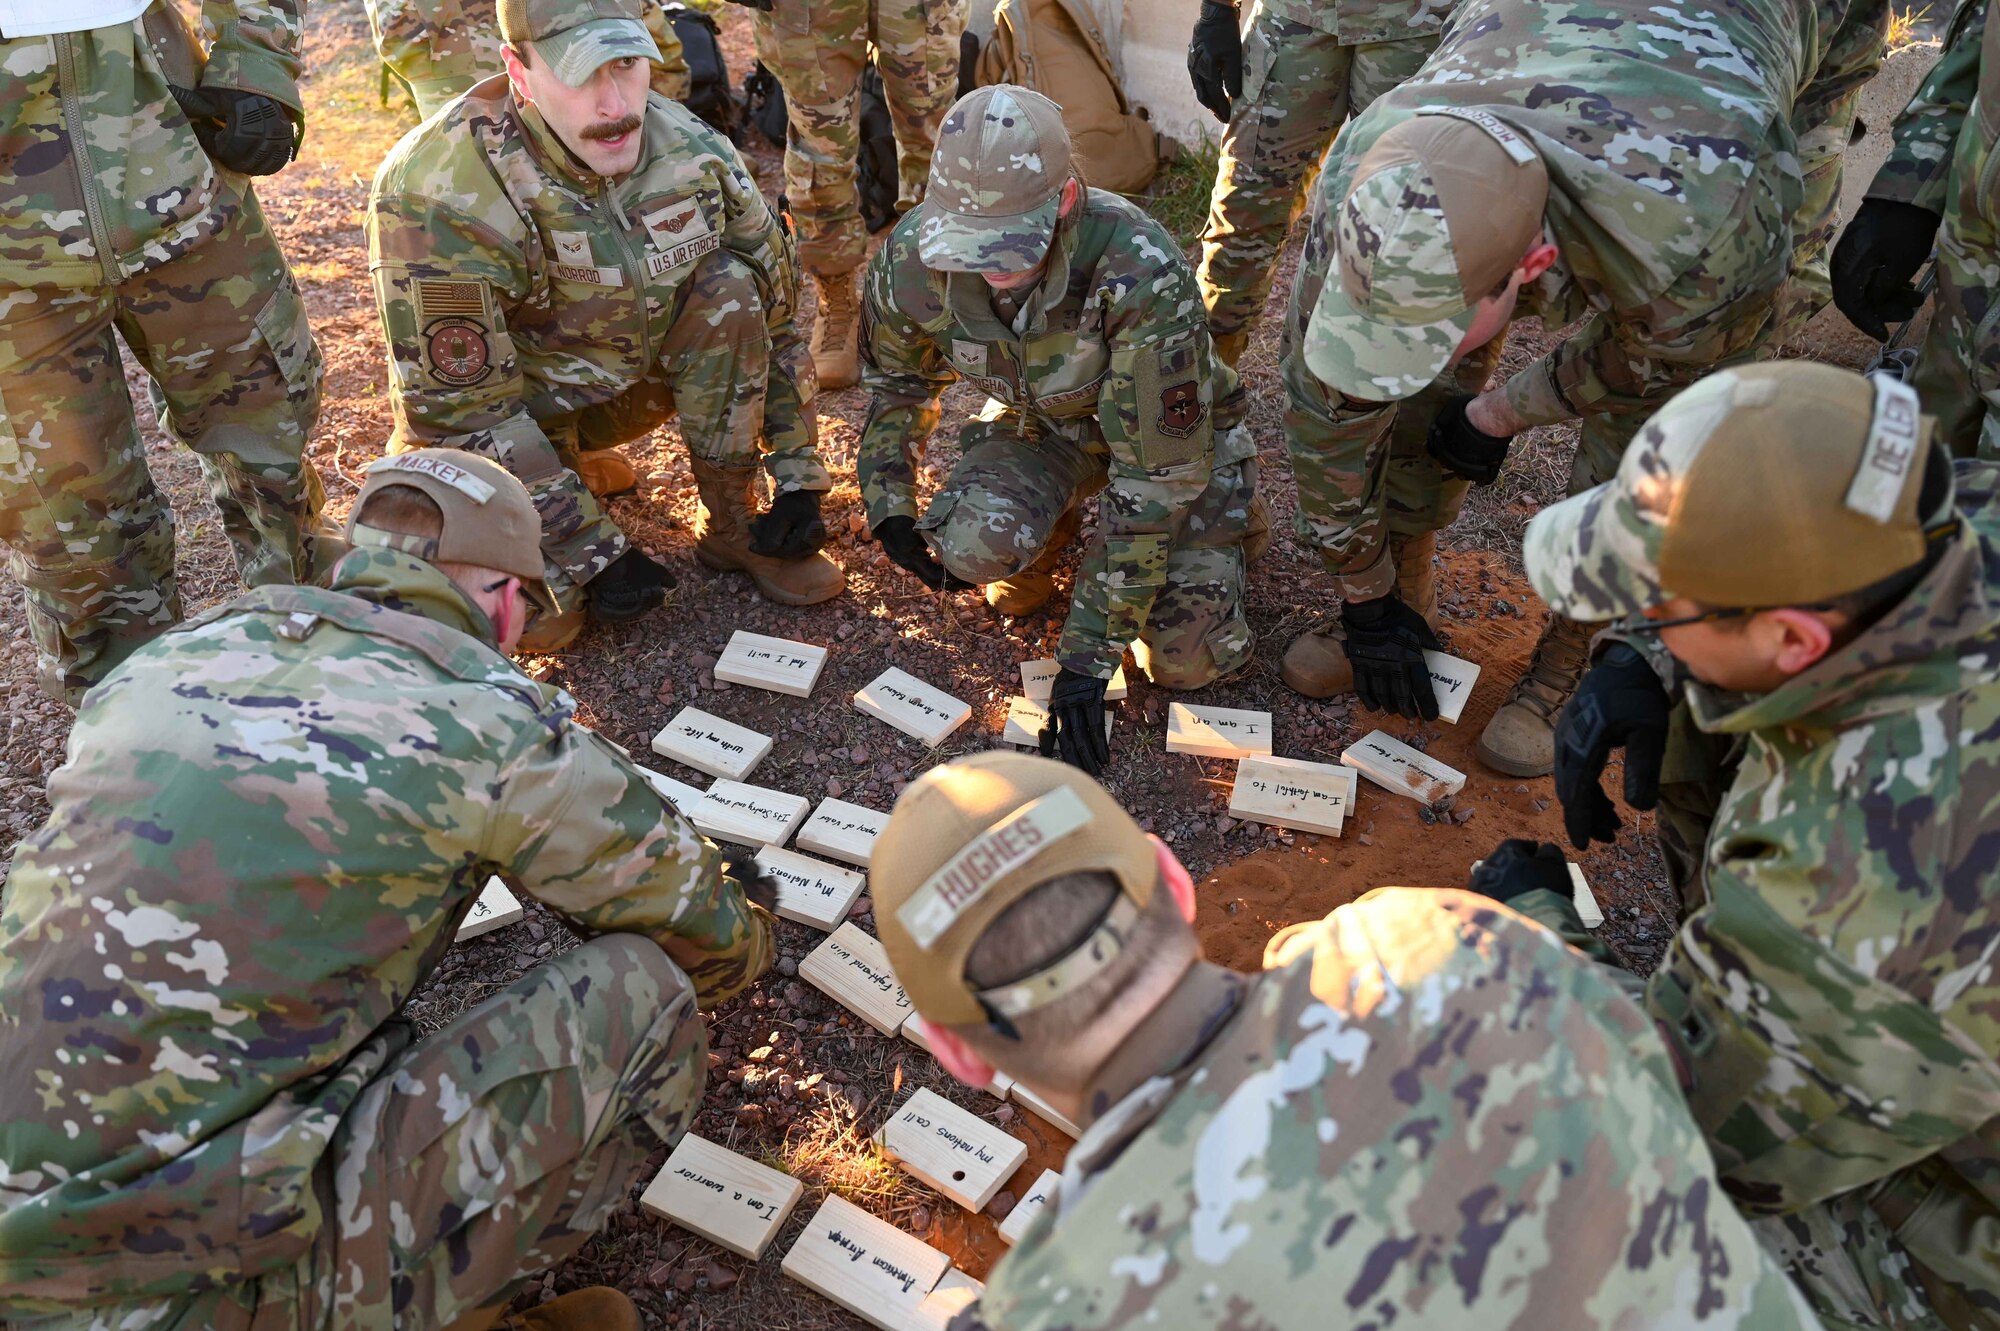 Students from the 97th Training Squadron huddle together to place phrases from the Airman’s Creed in the correct order during the Talon Challenge at Altus Air Force Base, Oklahoma, Oct. 14, 2023. At this exercise, students were tasked with carrying blocks with phrases from the Airman’s Creed up a hill and assembling them in order, ultimately leading to their recital of the creed as a team. (U.S. Air Force photo by Airman 1st Class Kari Degraffenreed)